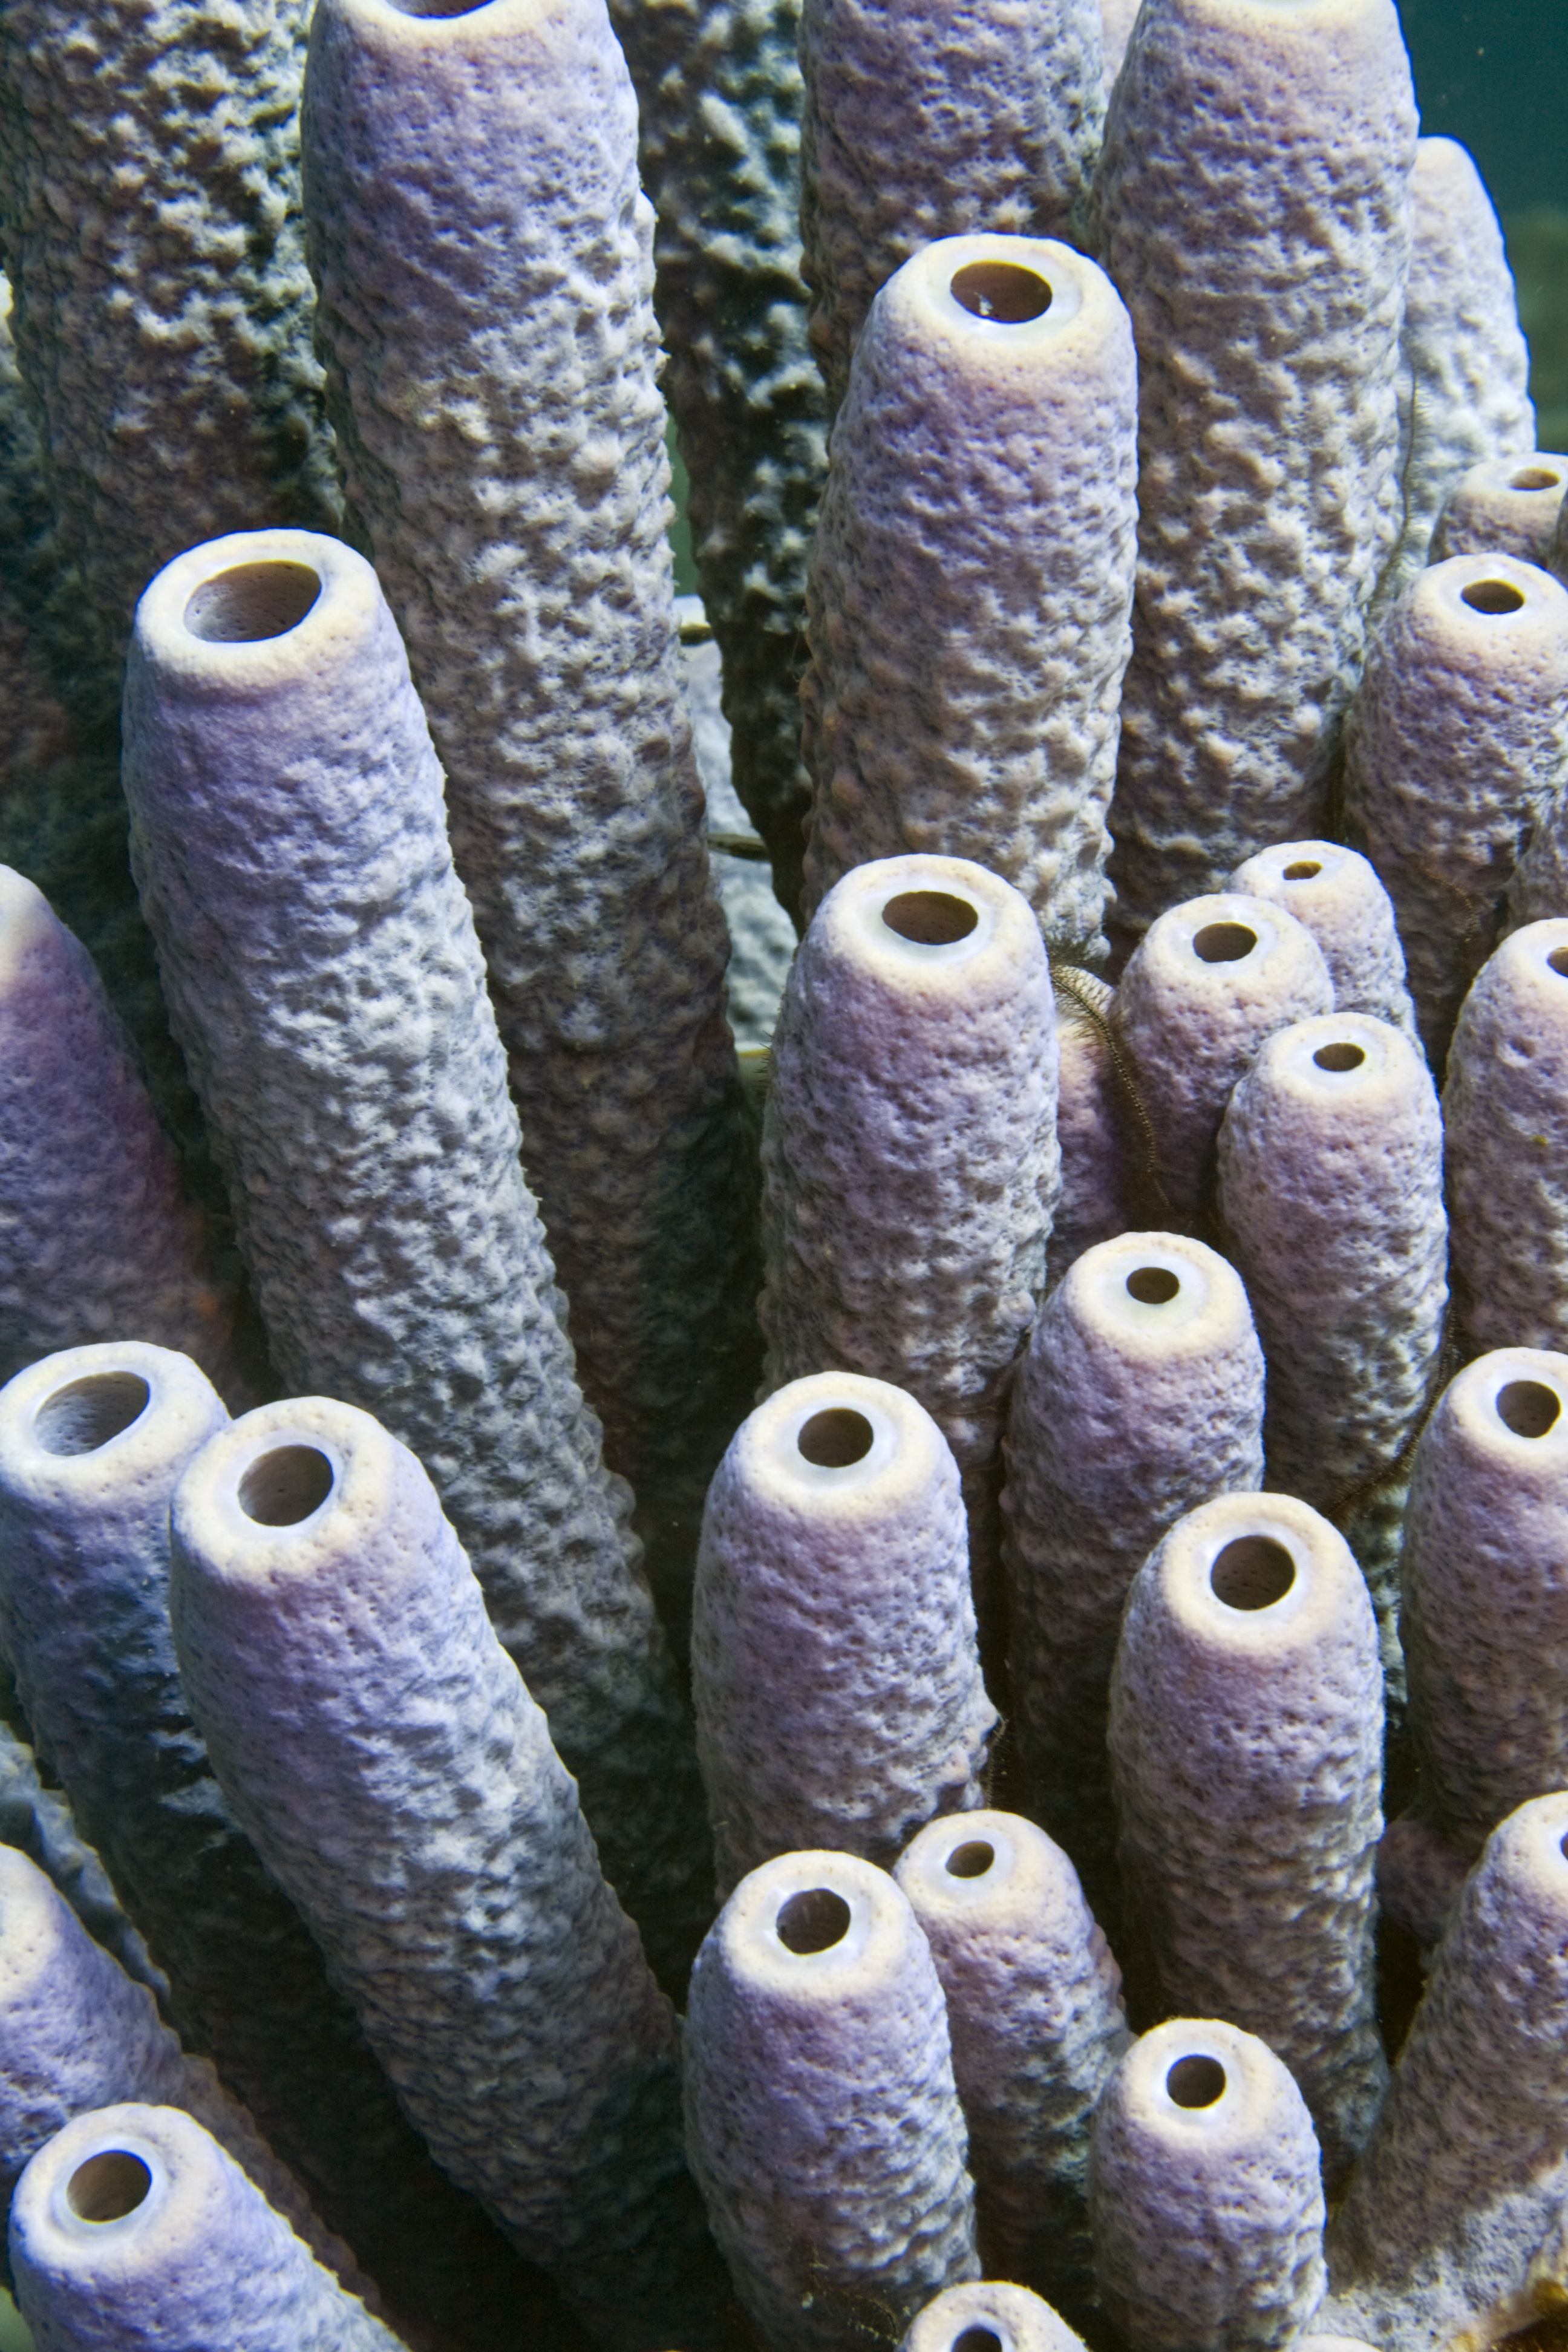 Close up view of lavender tube sponges on the island of Bonaire